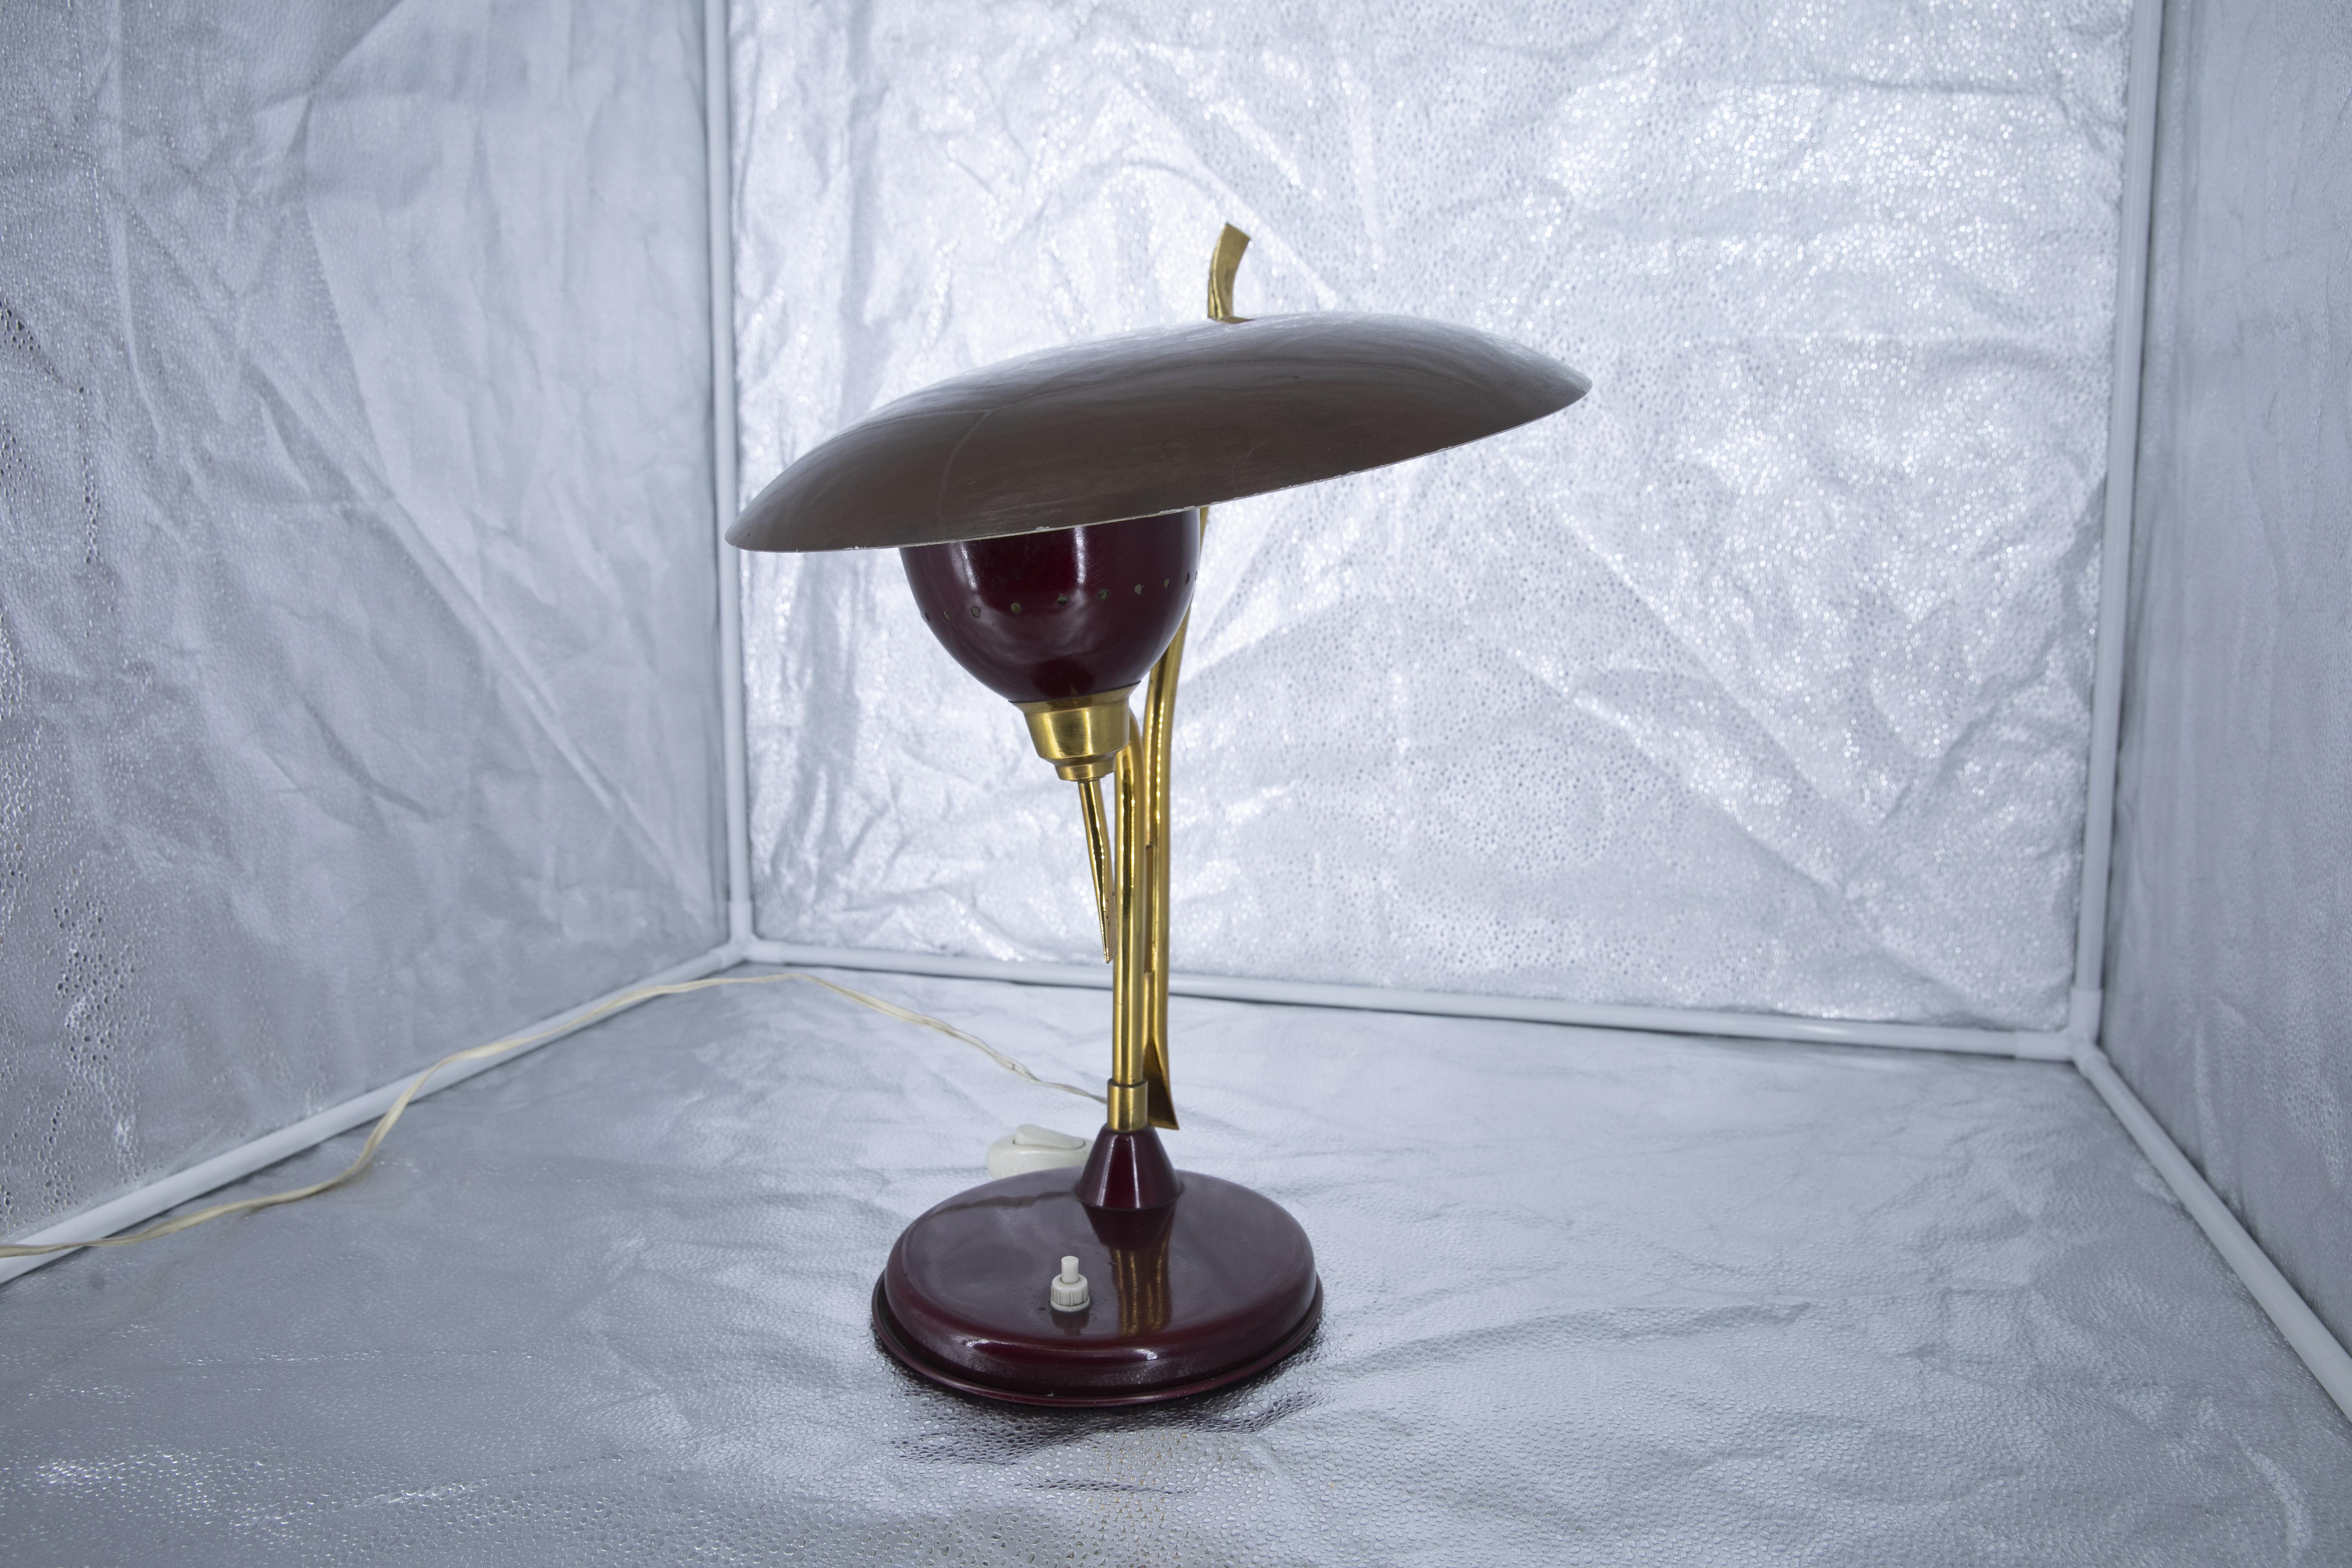 Mid-20th Century Desk Table Lamp Design by Oscar Torlasco for Lumen Milano, Made in Italy, 1950s For Sale